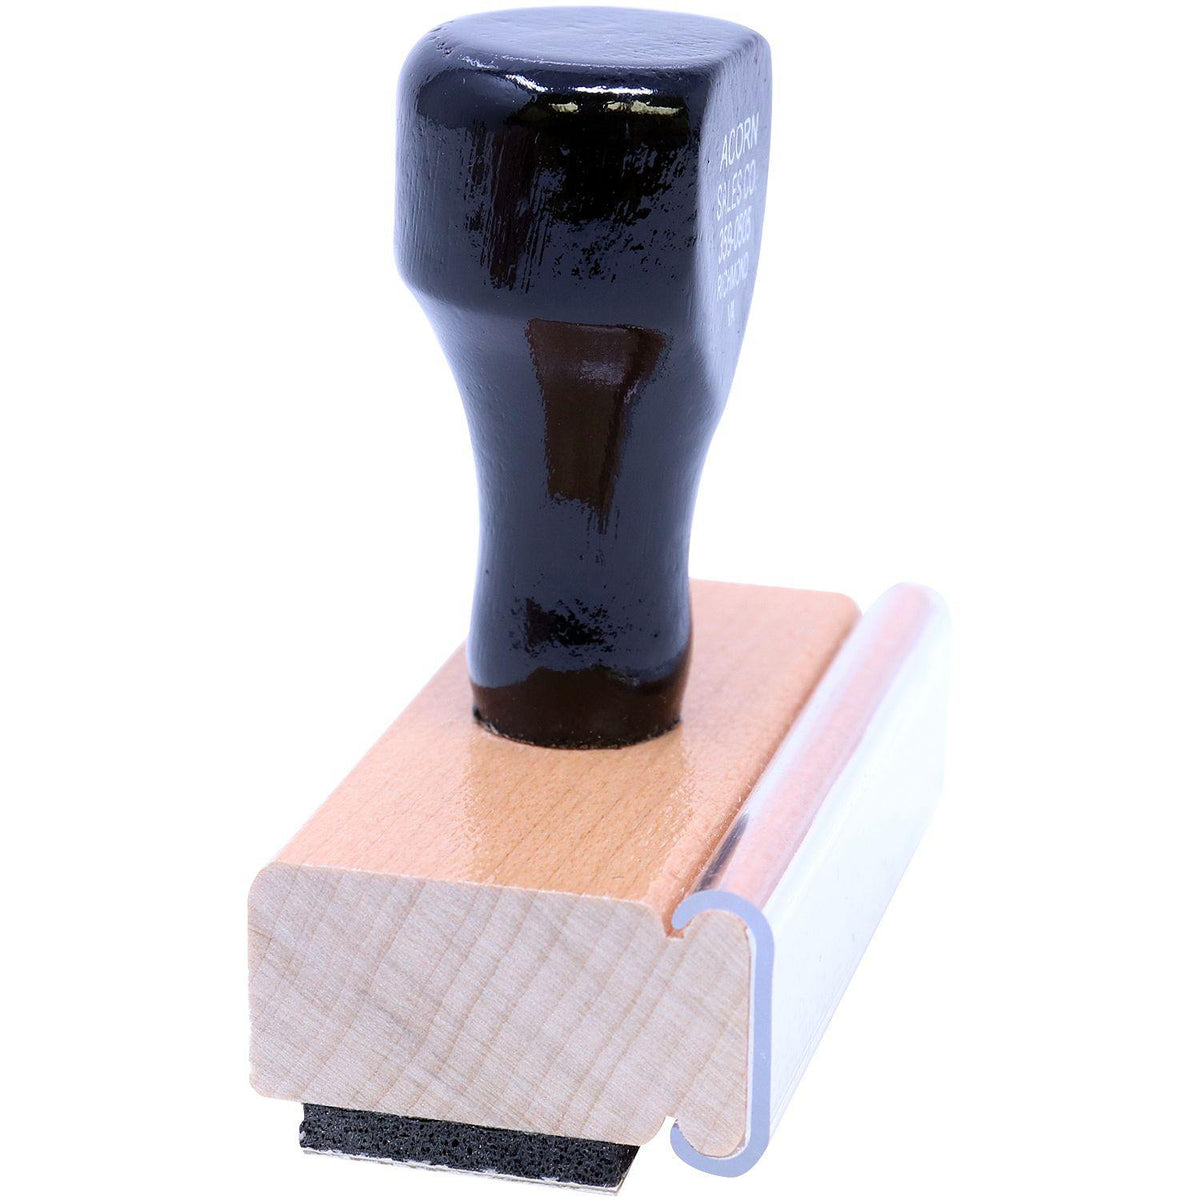 Side View of Expedite Rubber Stamp at an Angle